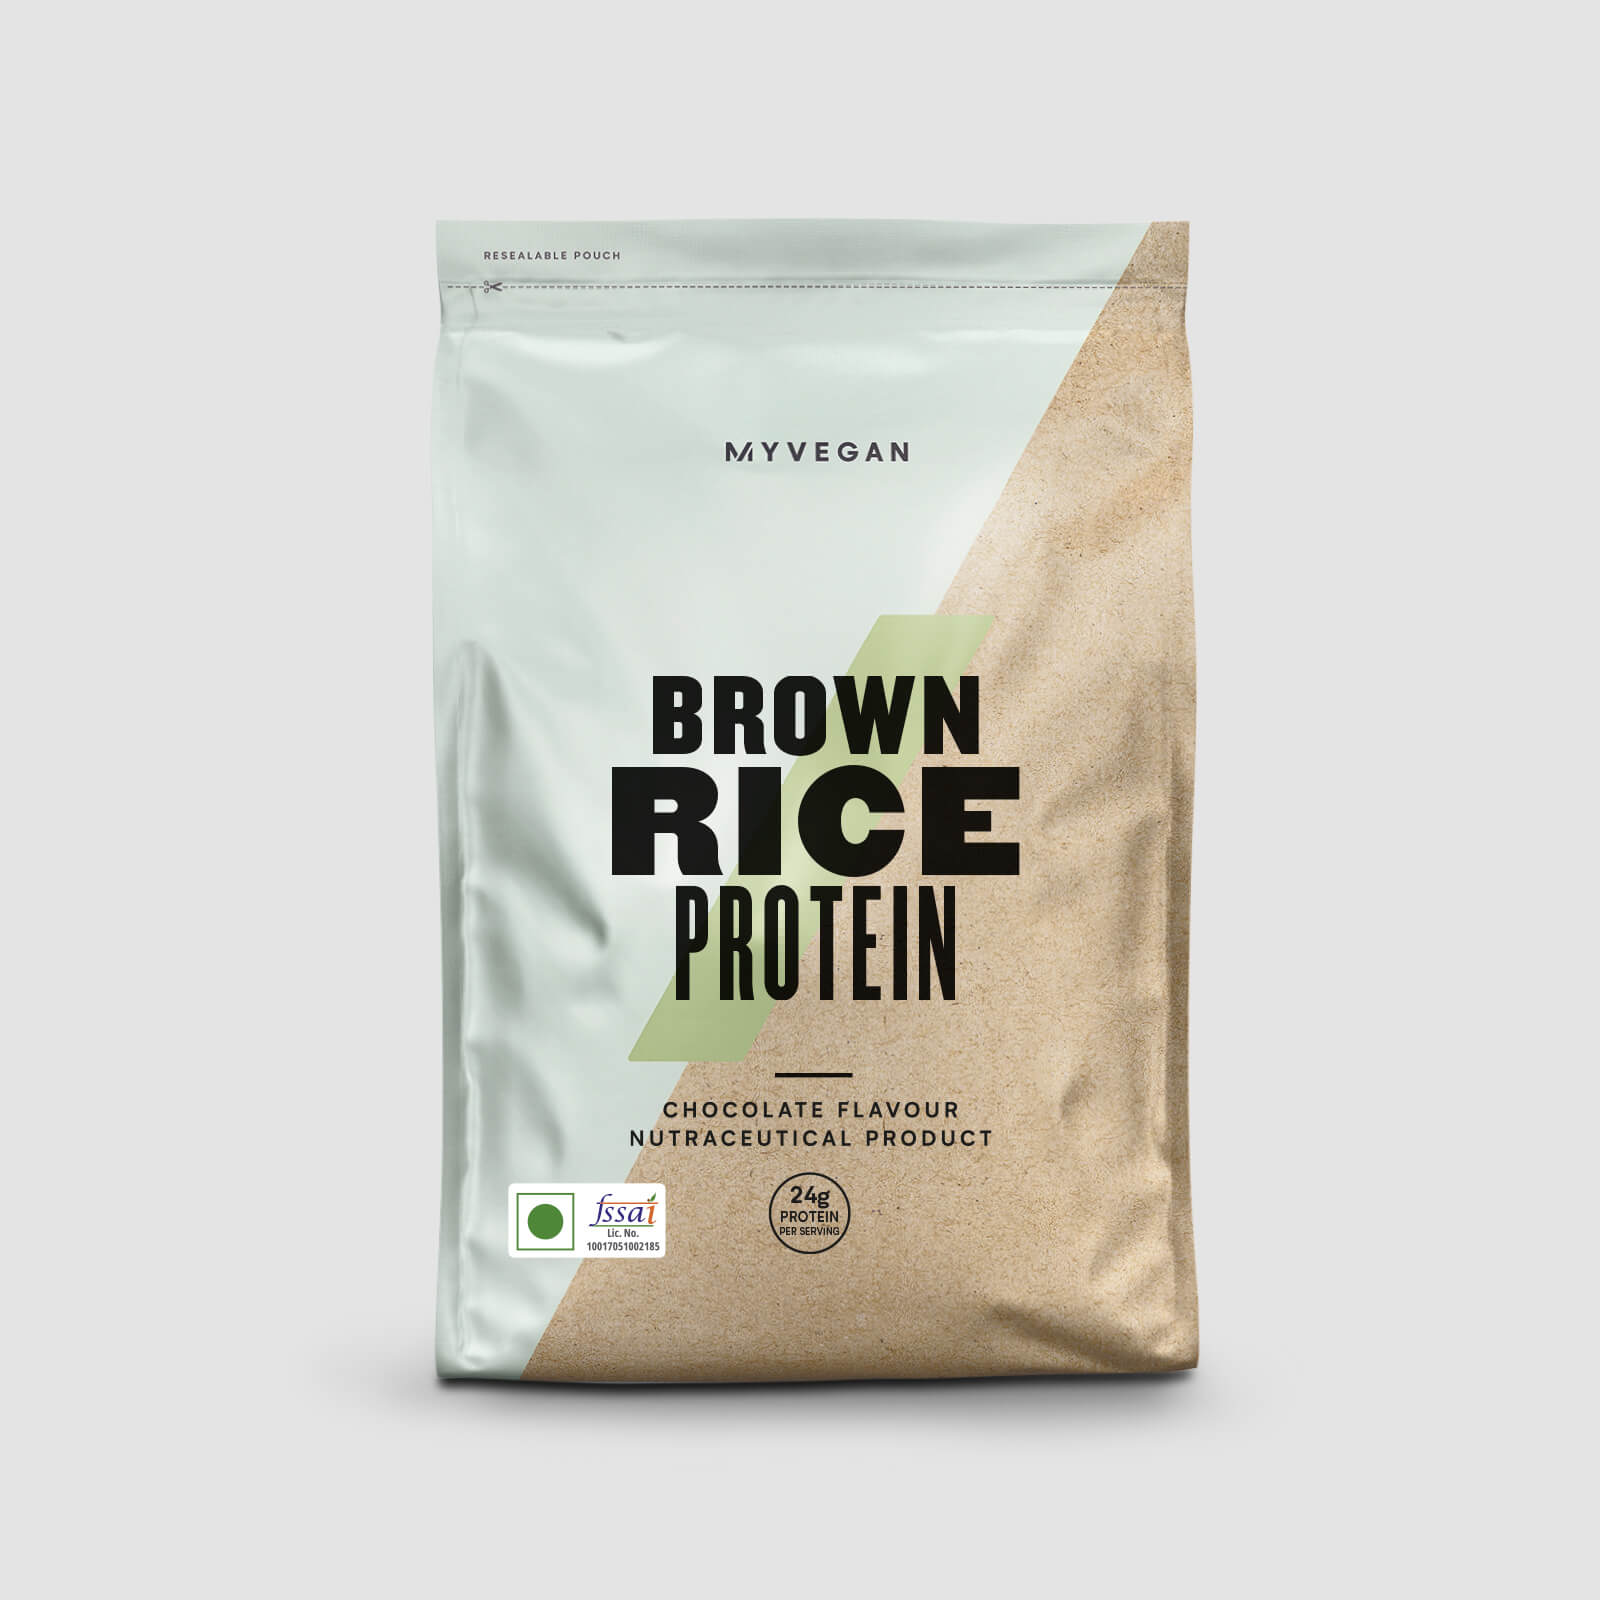 Brown Rice Protein - 1kg - Chocolate